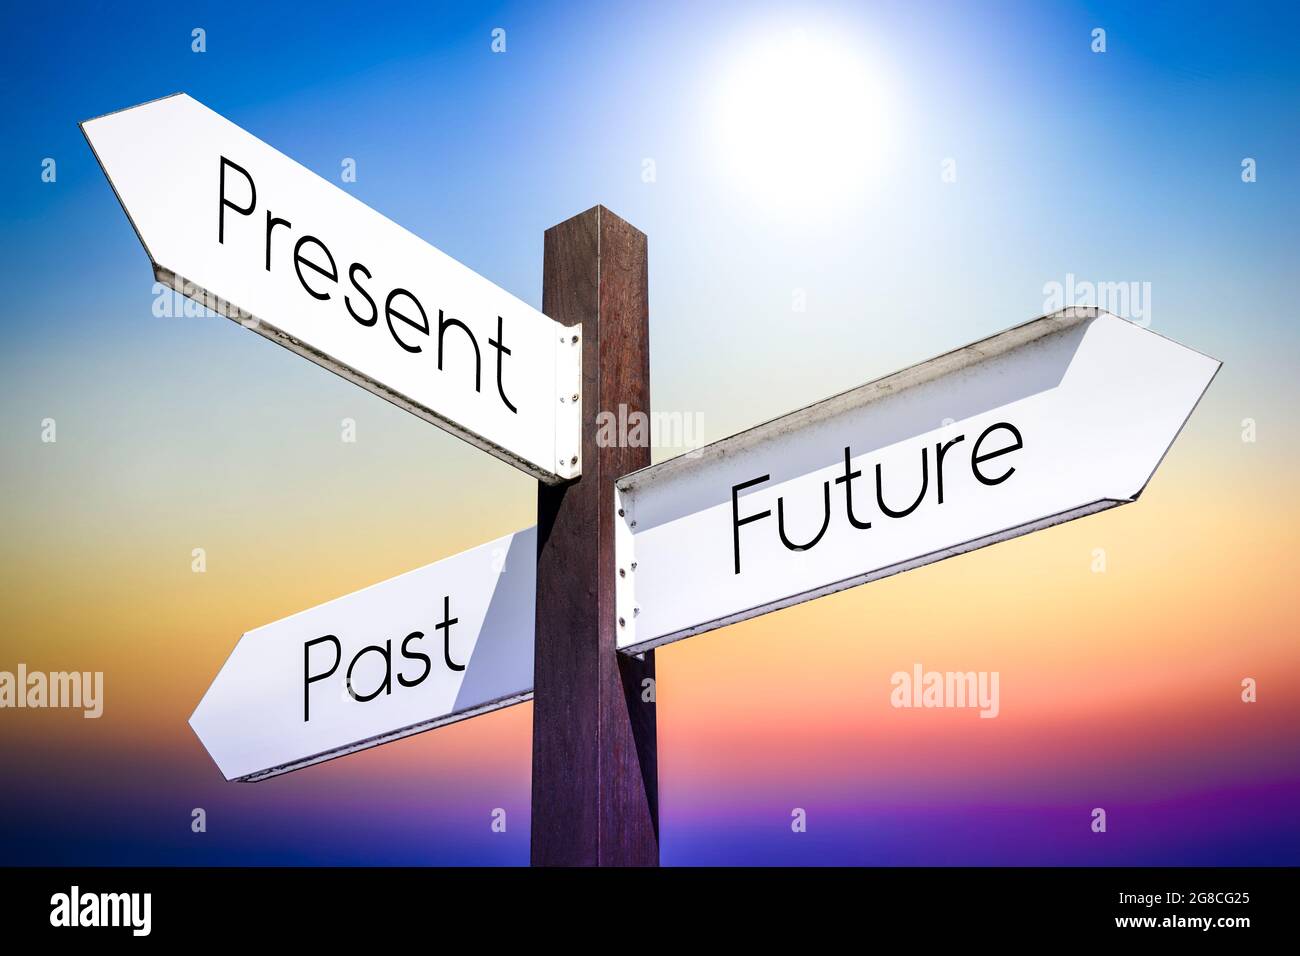 Future, present, past concept - signpost with three arrows Stock Photo